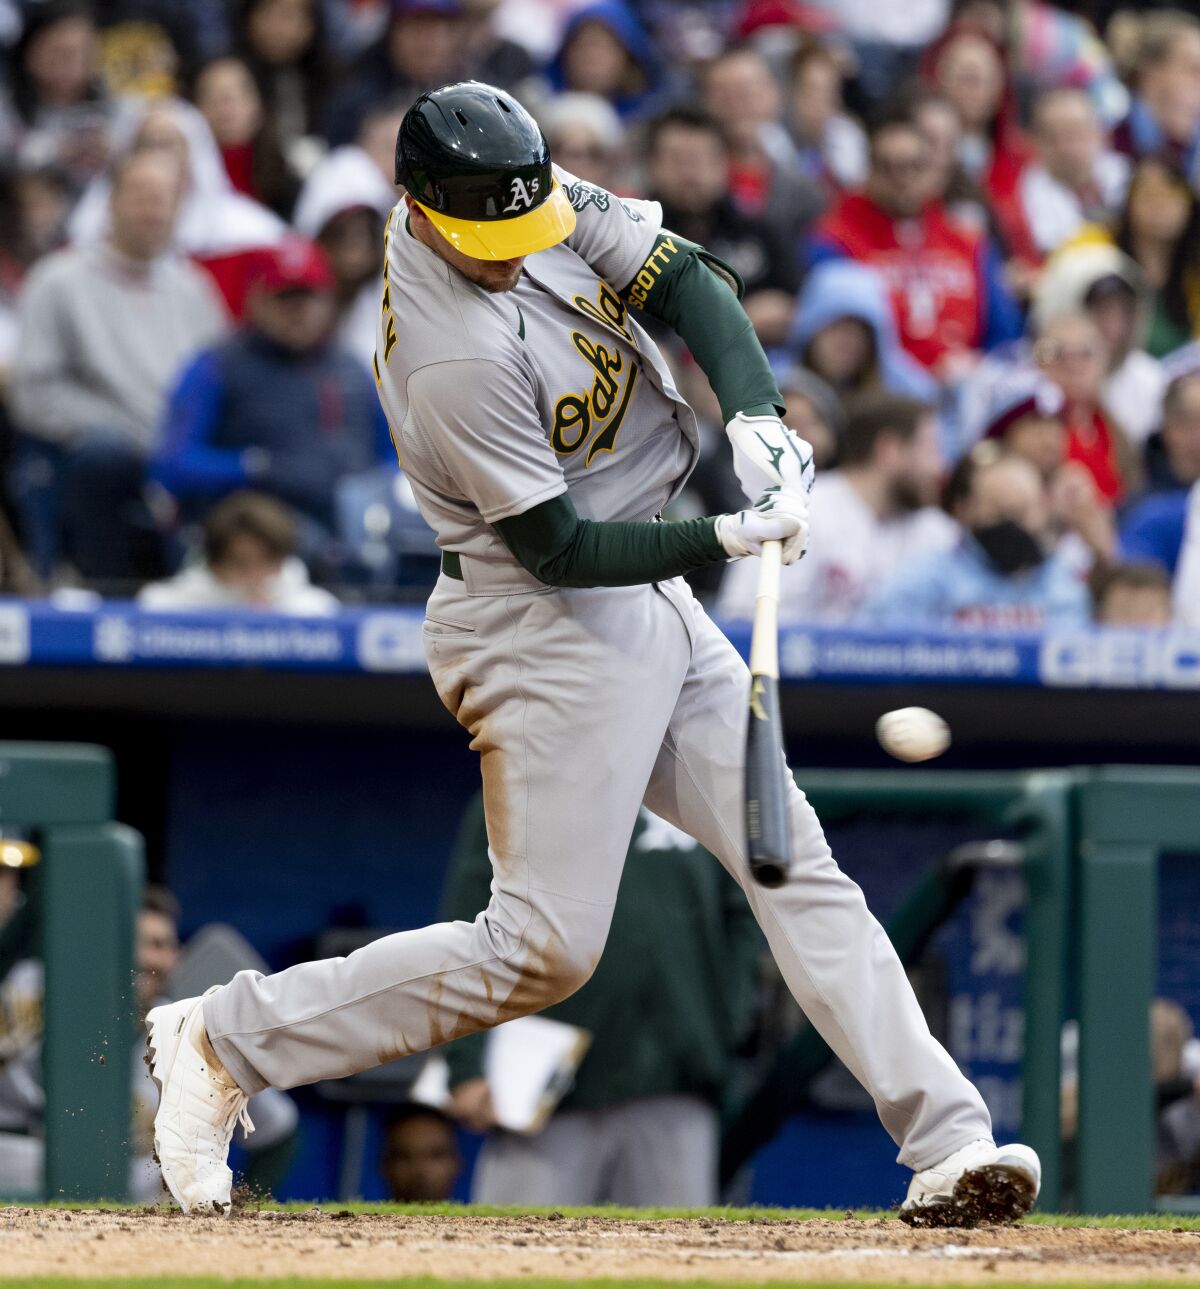 Oakland Athletics' Stephen Piscotty (25) hits an RBI single during the eighth inning of a baseball game against the Philadelphia Phillies, Saturday, April 9, 2022, in Philadelphia. (AP Photo/Laurence Kesterson)